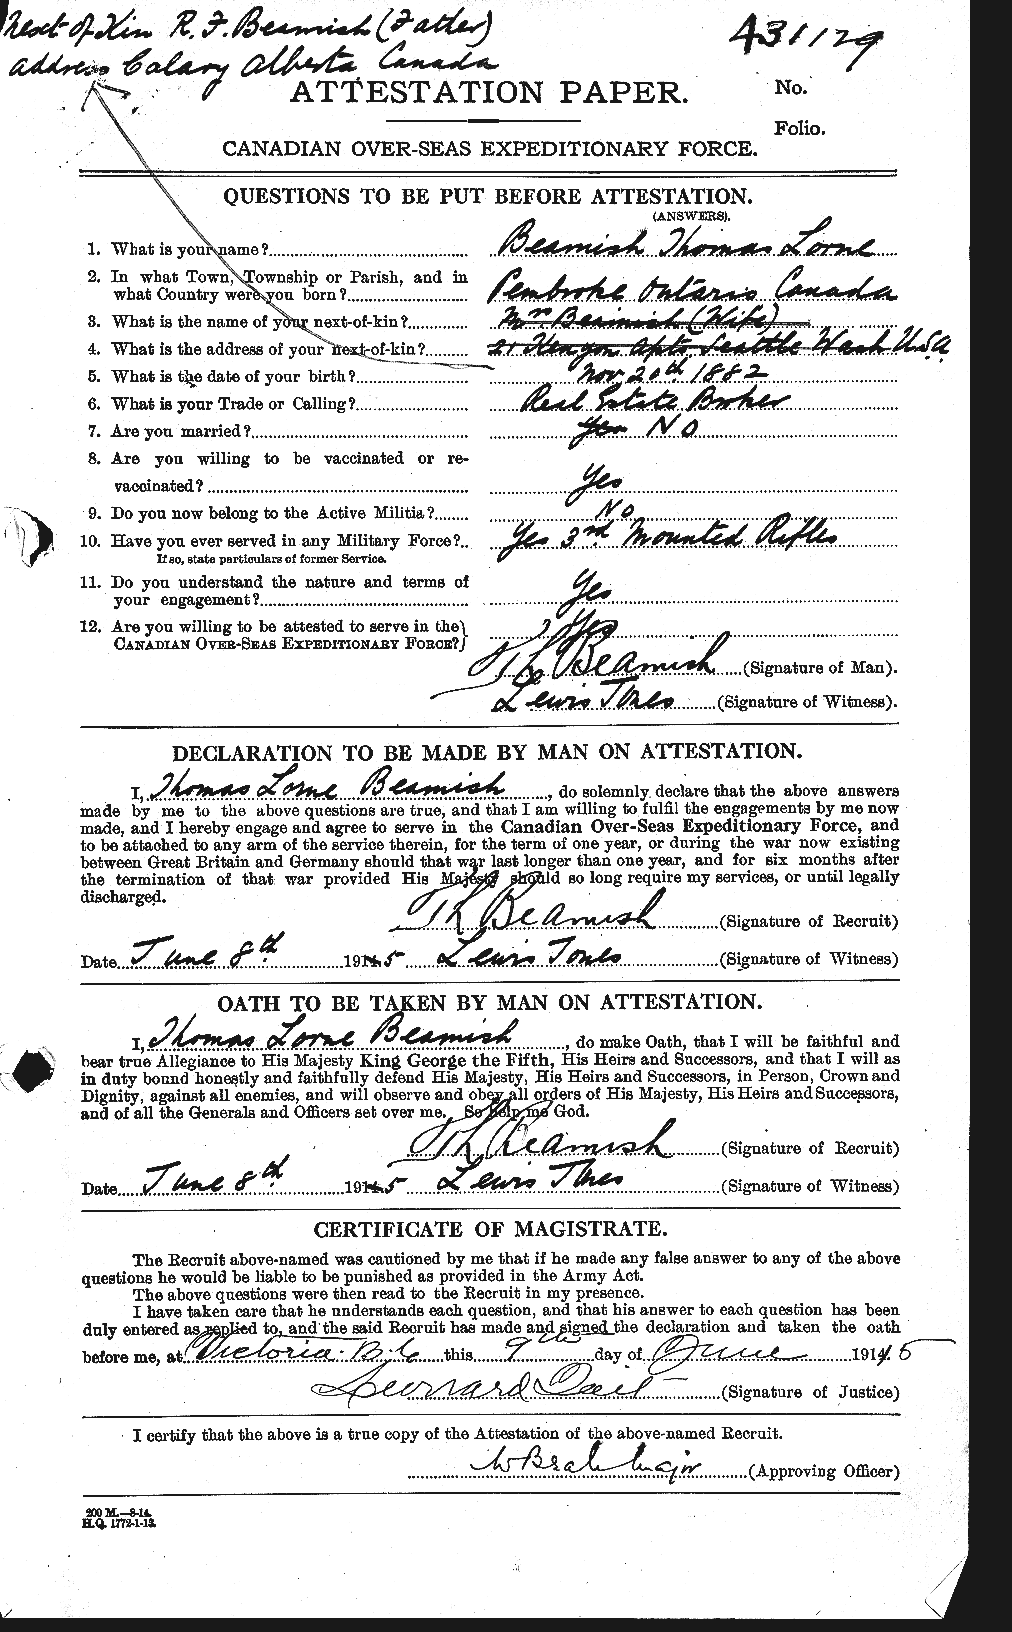 Personnel Records of the First World War - CEF 230138a